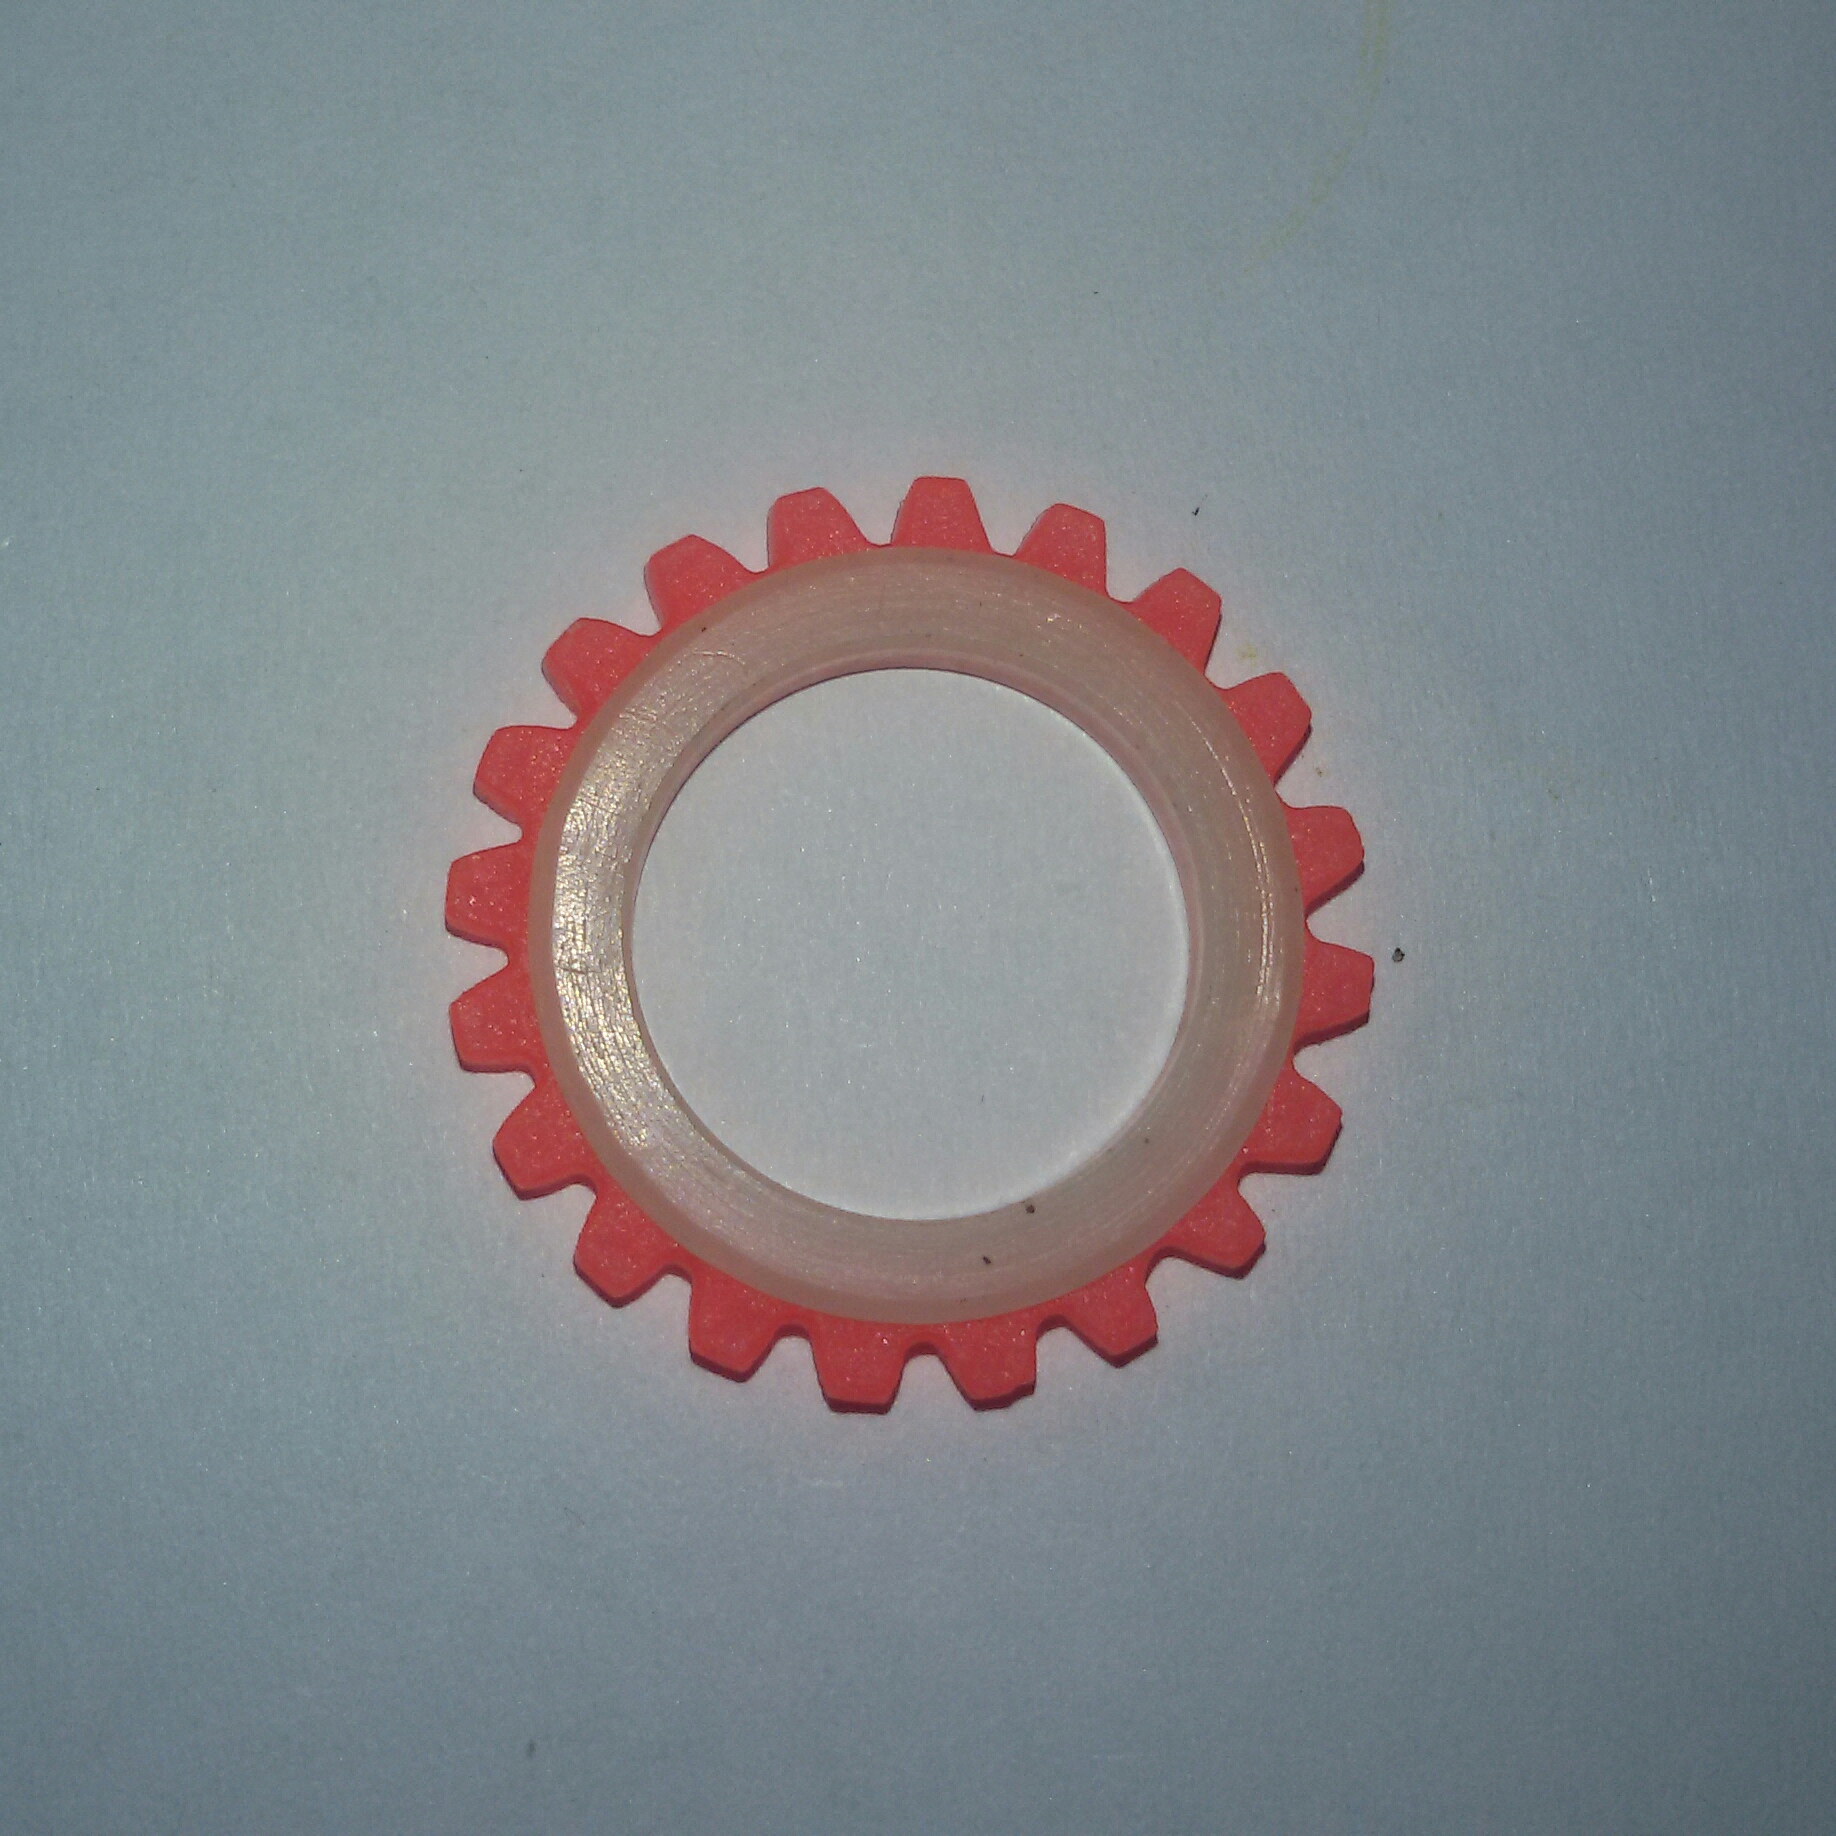 GE003_GR20_Temple_Dummy_Ring_for_two_row_ring_with_Gear_Top_54_72.jpg